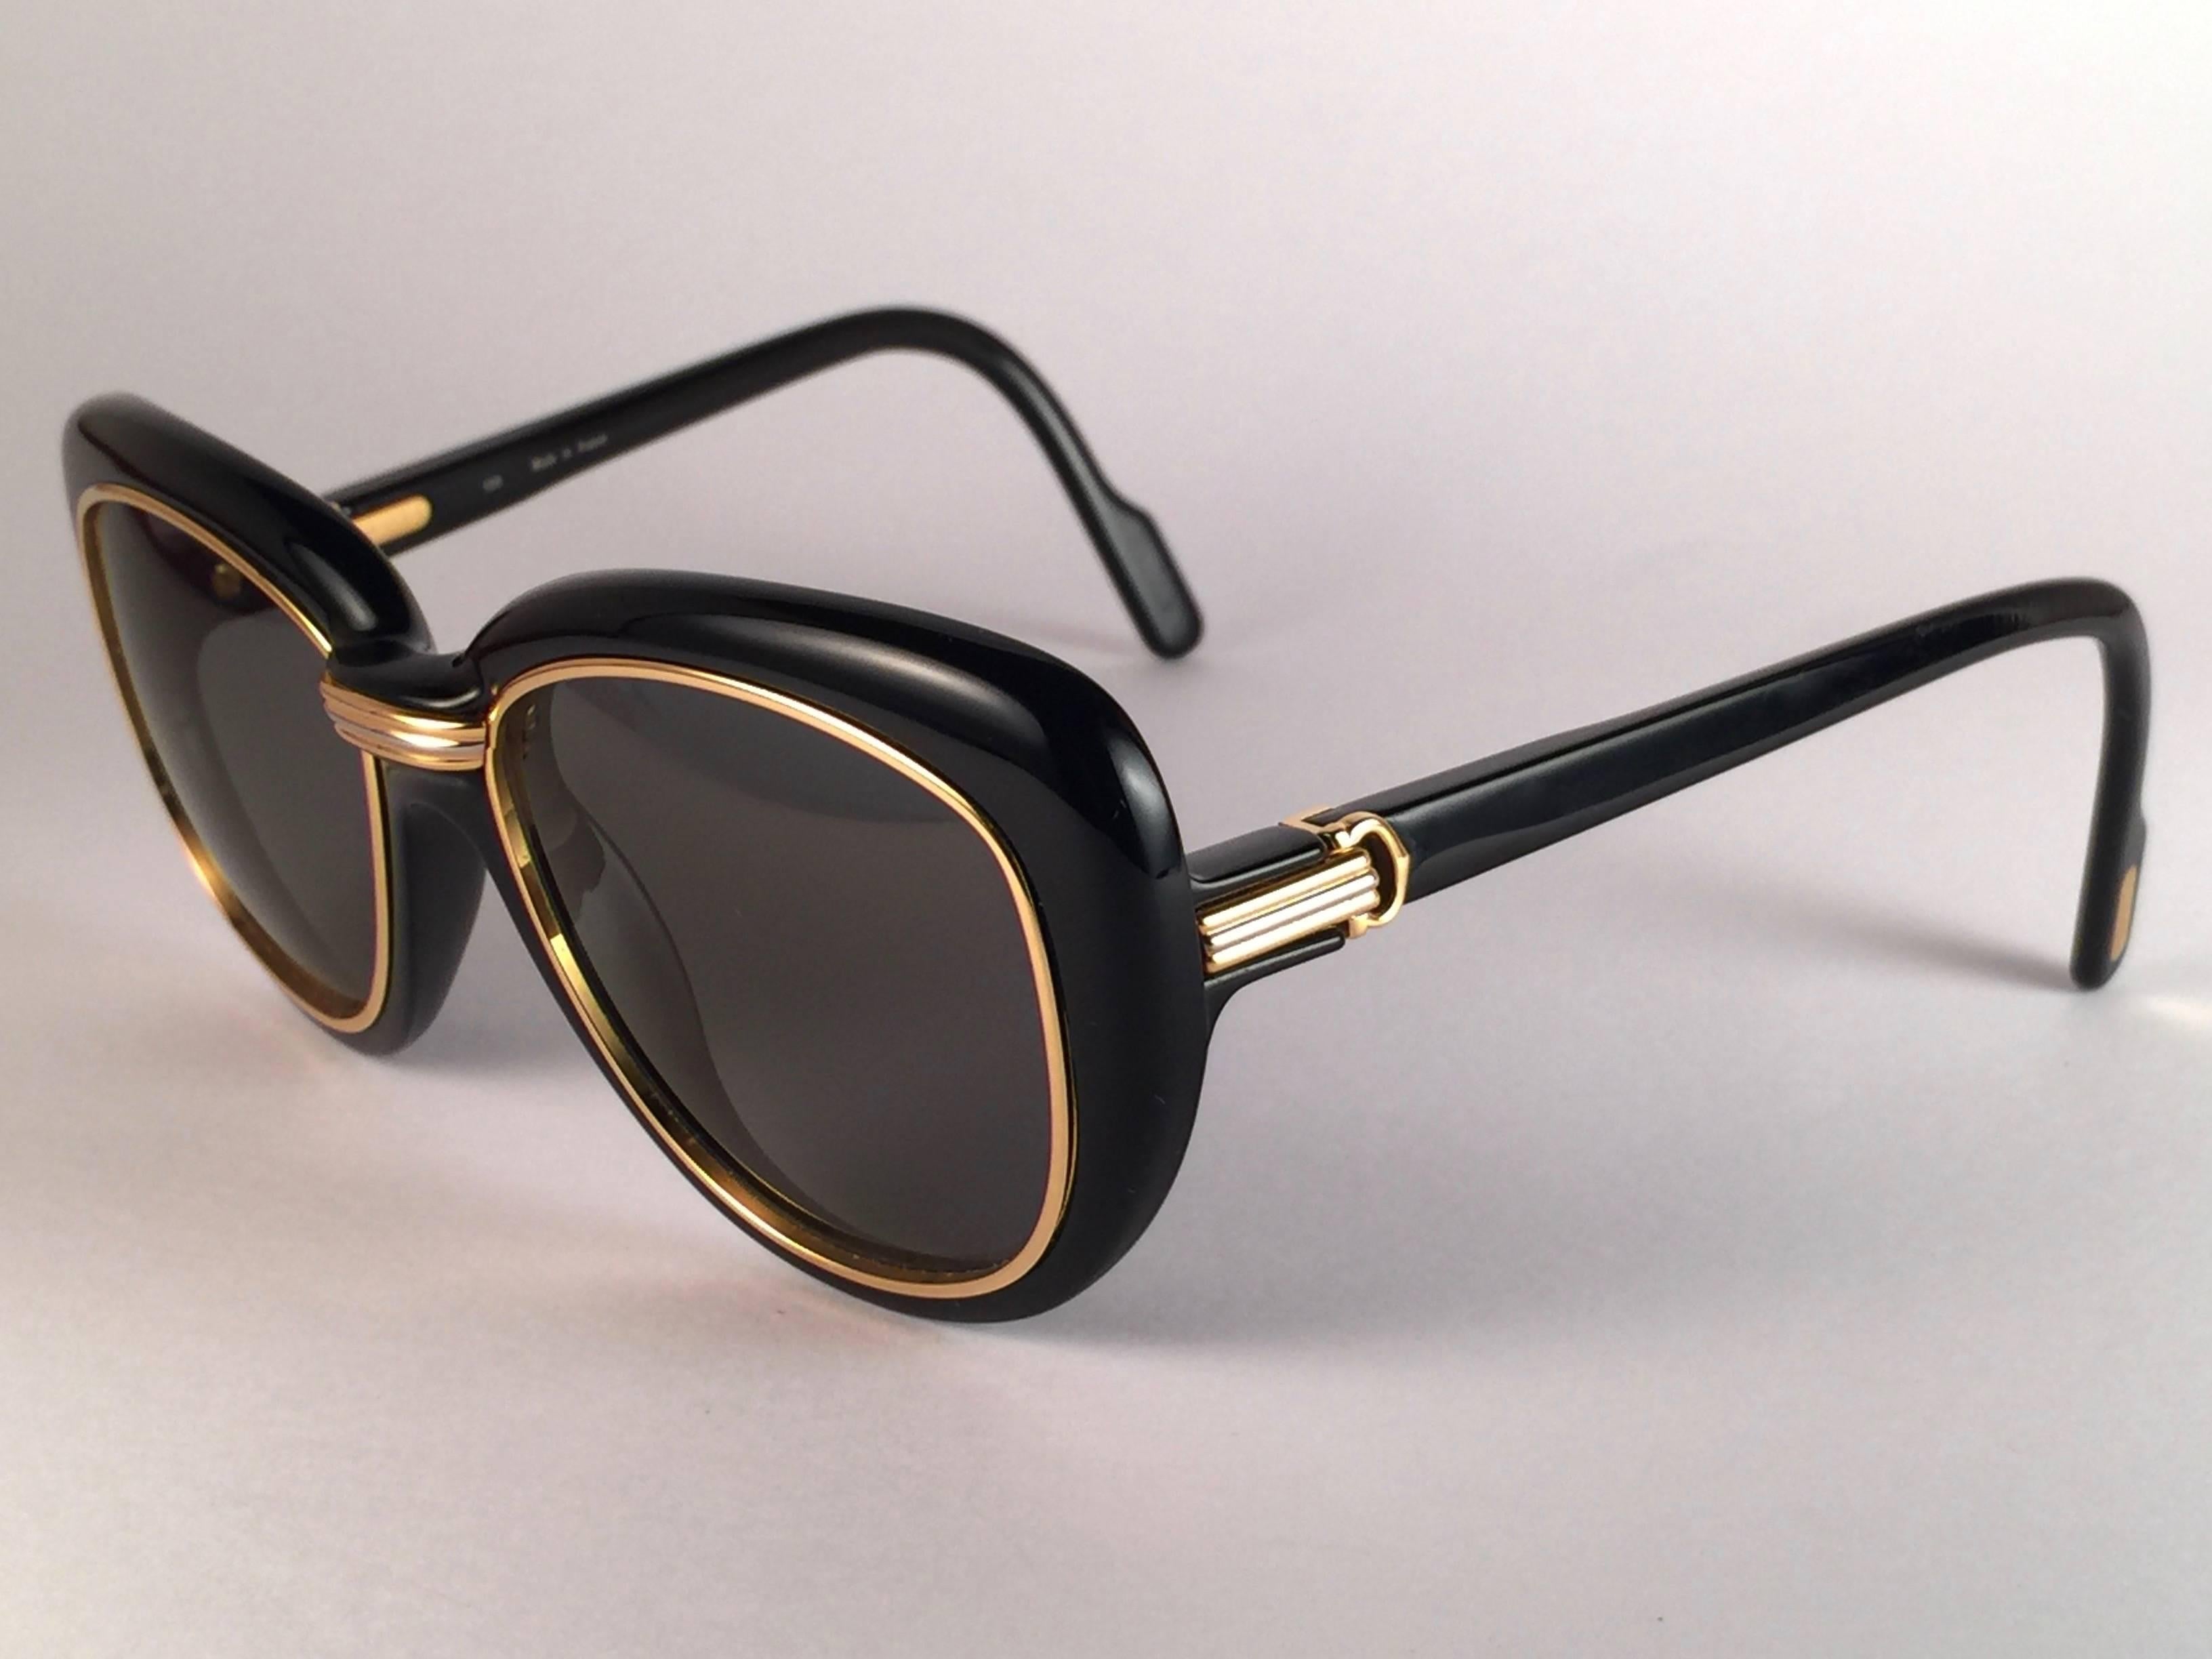 New Vintage Cartier Conquete  51mm Black Gold & Yellow Inserts France Sunglasses In New Condition For Sale In Baleares, Baleares